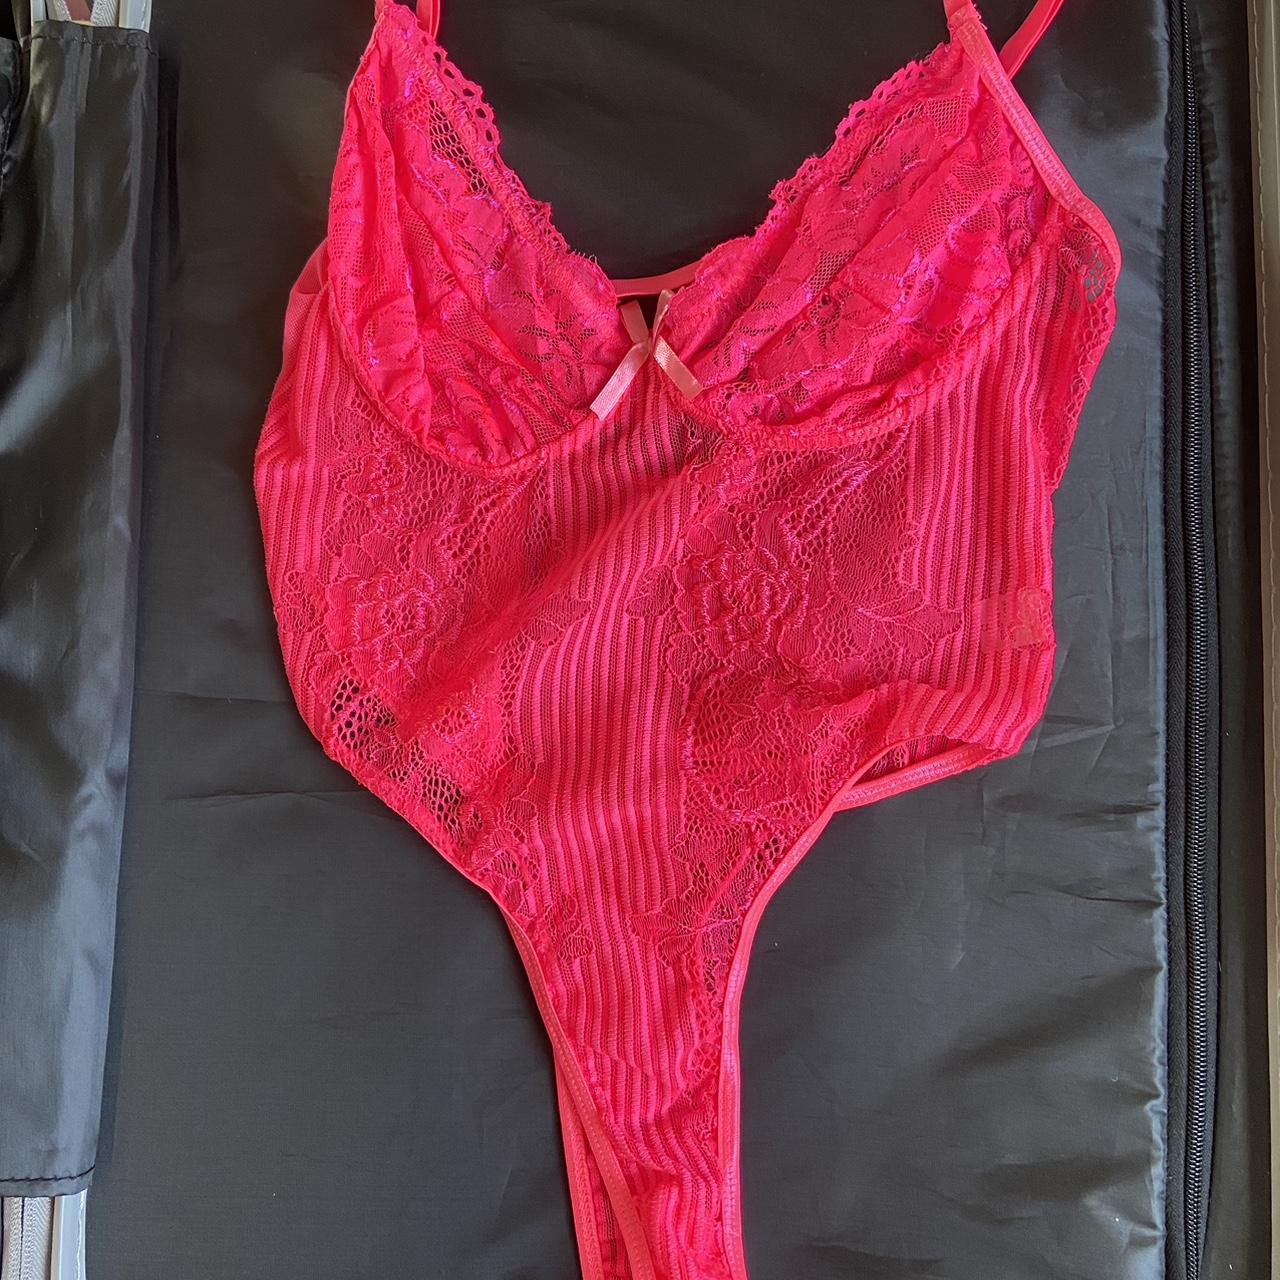 Neon pink lace bodysuit Never worn Stretchy - Depop